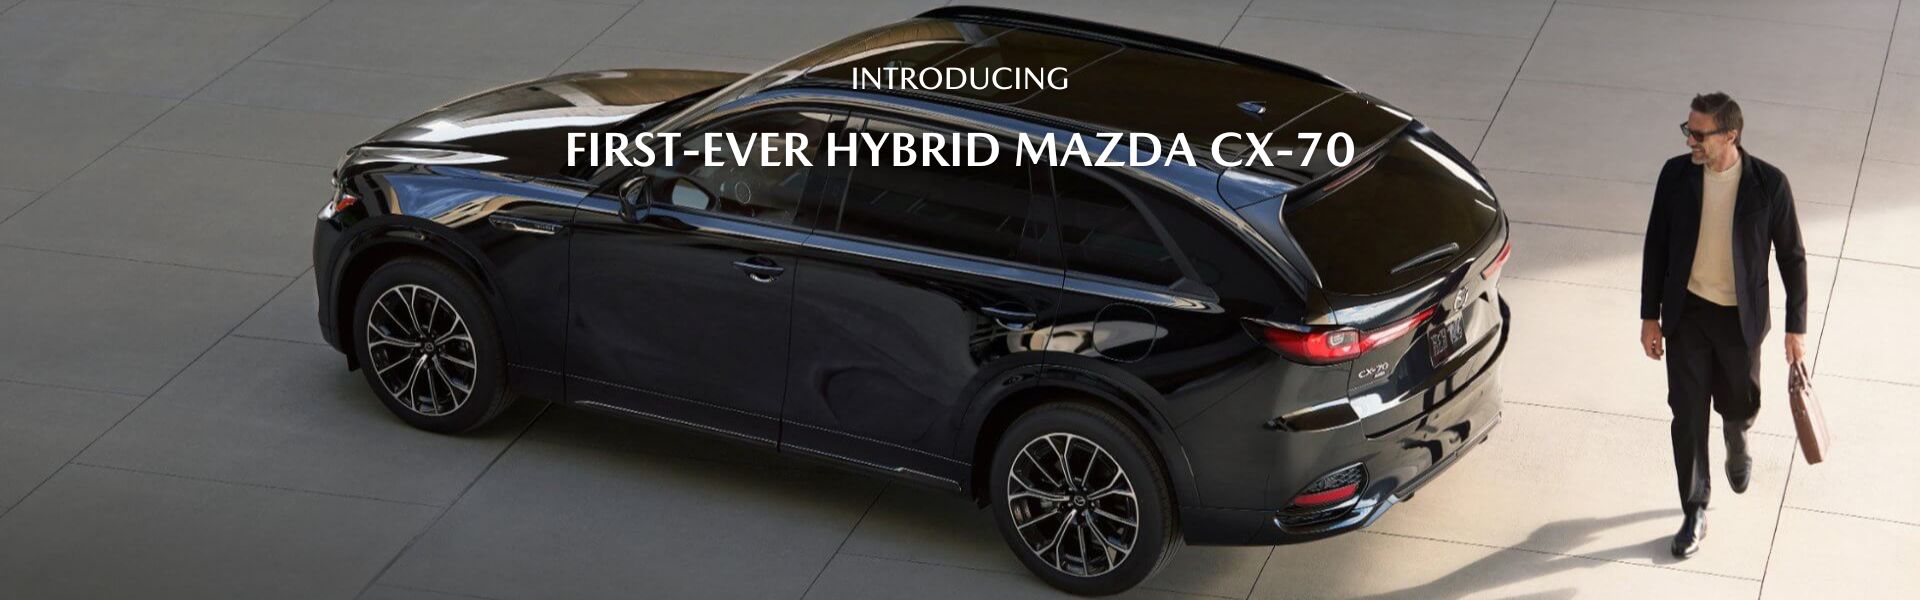 Introducing First-Ever Hybrid Mazda CX-70